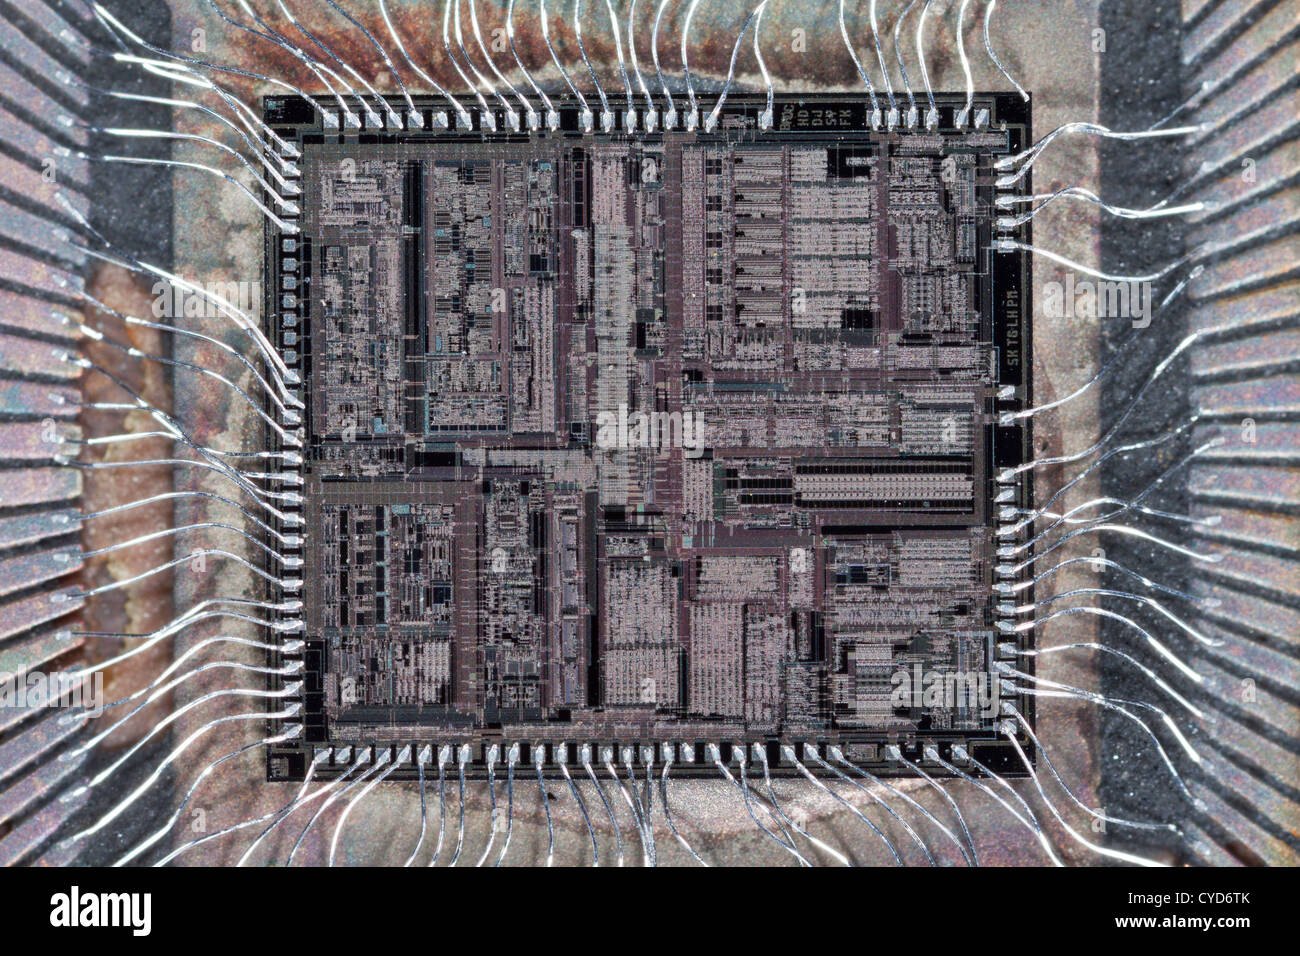 Integrated circuit from an EPROM memory microchip showing the memory blocks, supporting circuitry, fine silver connecting wires Stock Photo